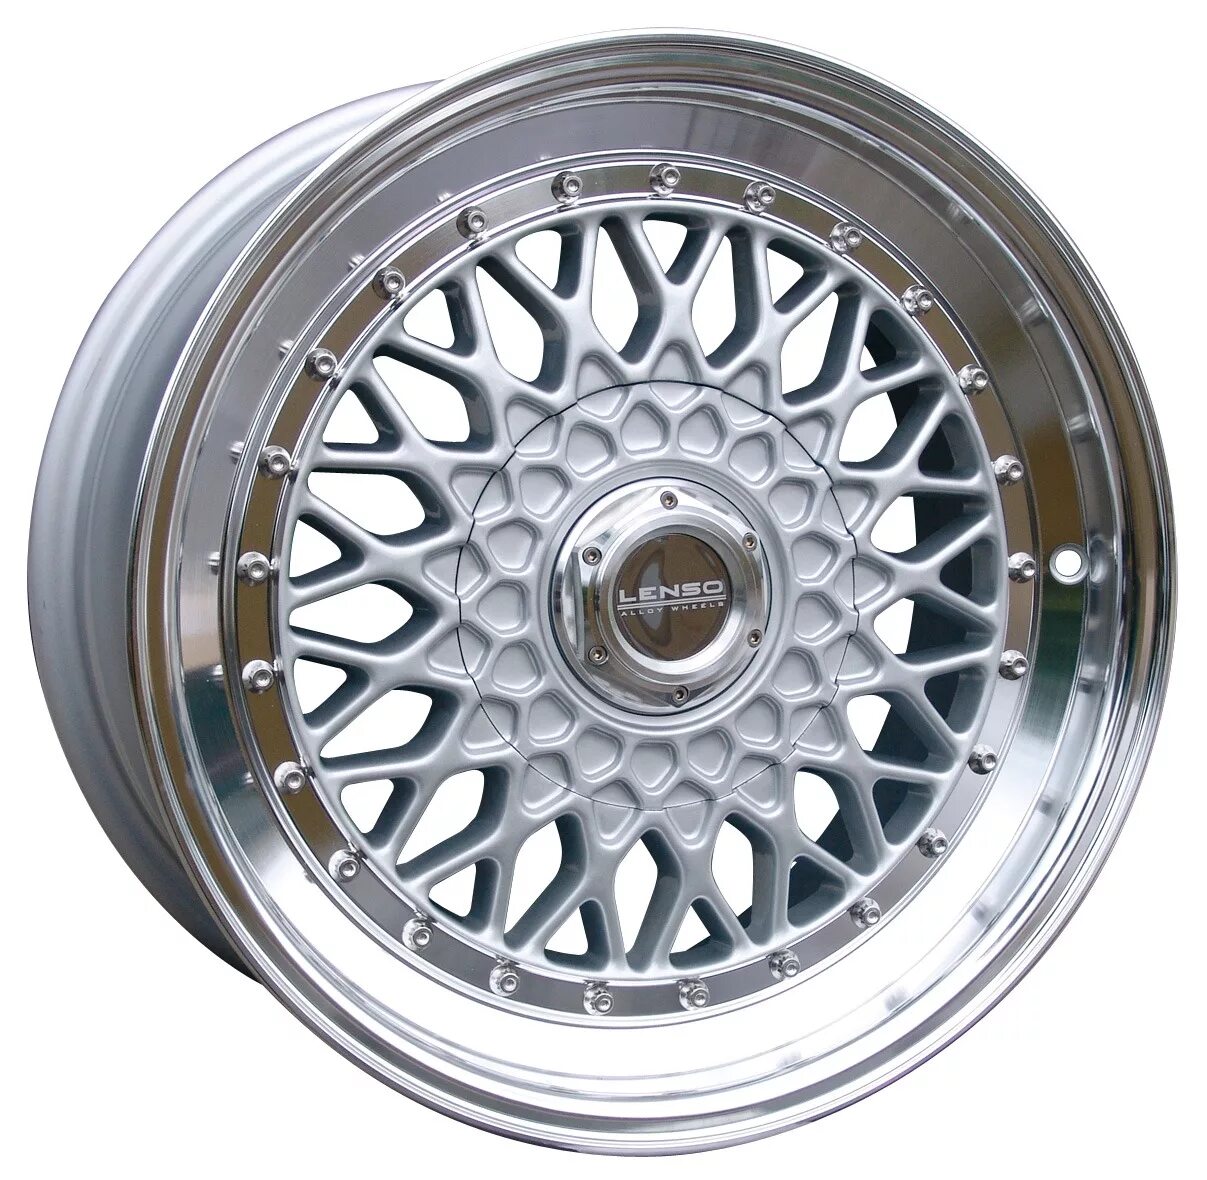 Lenso bsx 17. Lenso bsx диски. Реплика BBS 4x100 r14. Lenso bsx сборные r15 5x100. 5x 15 25